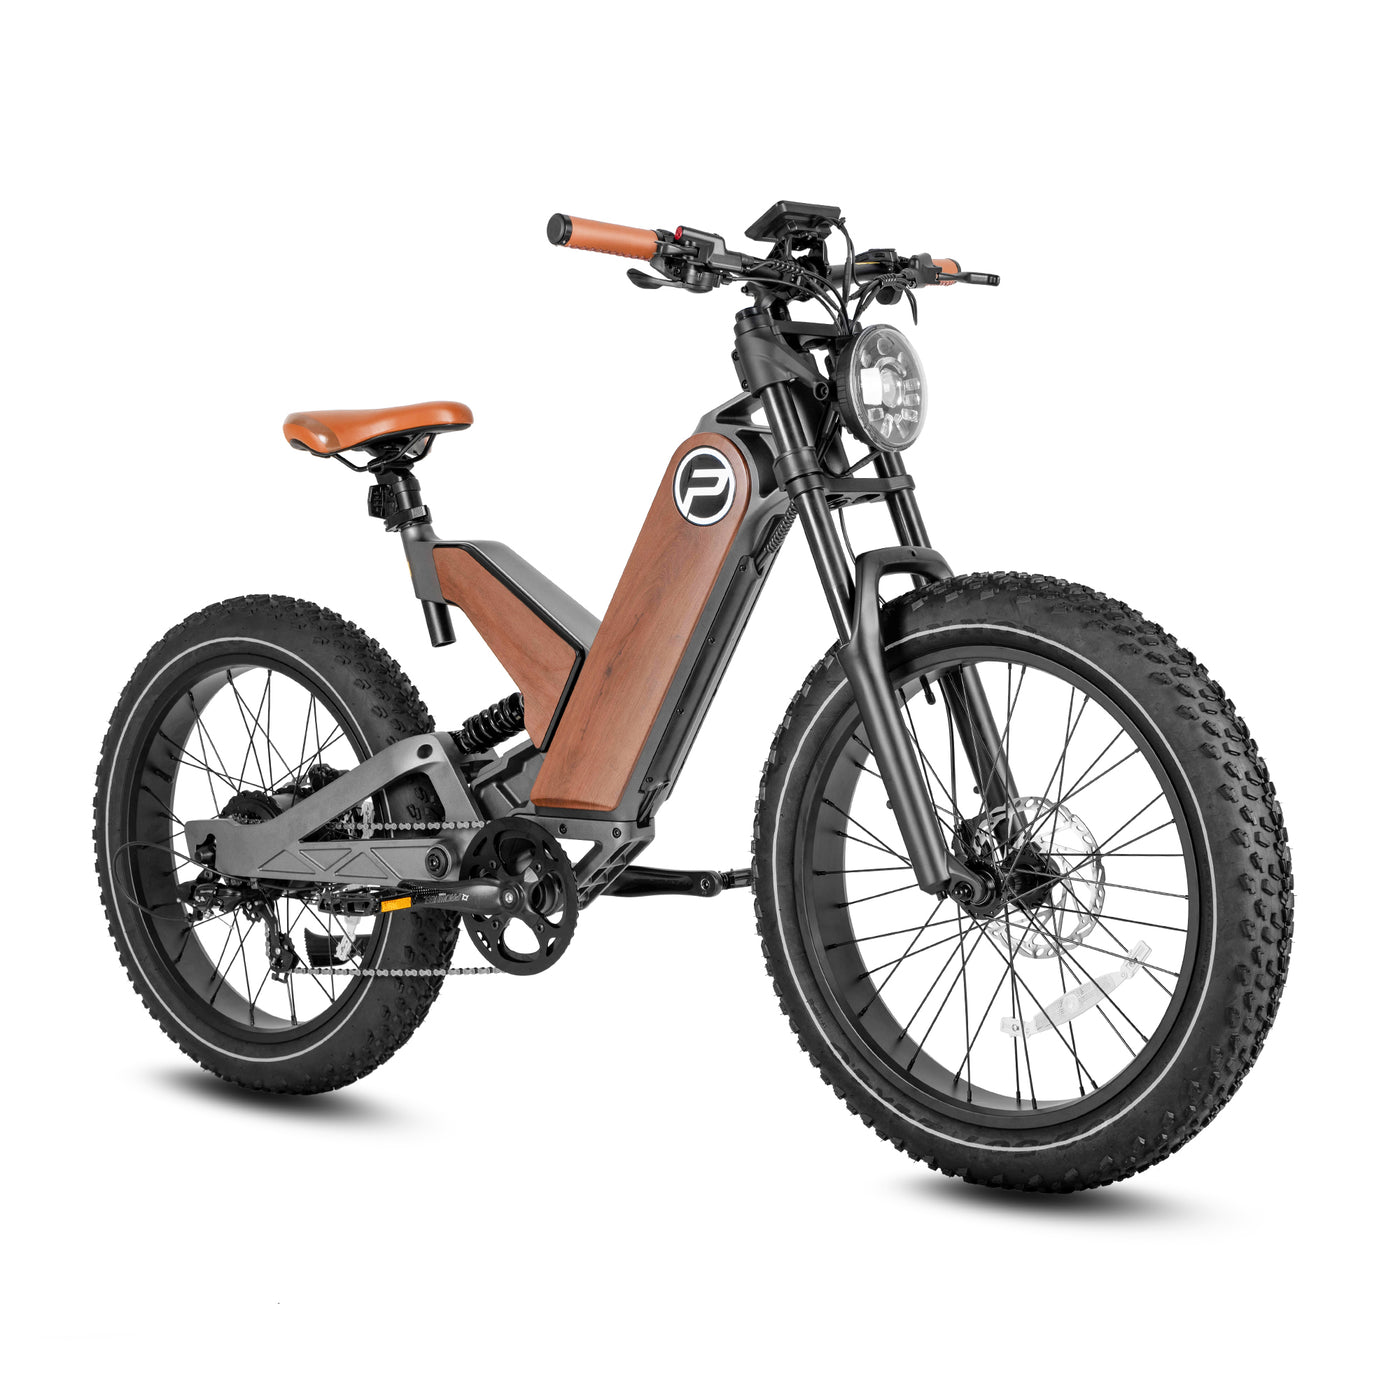 24 Inch Fat Tire All Terrain Removable Battery Electric Bike P5-A